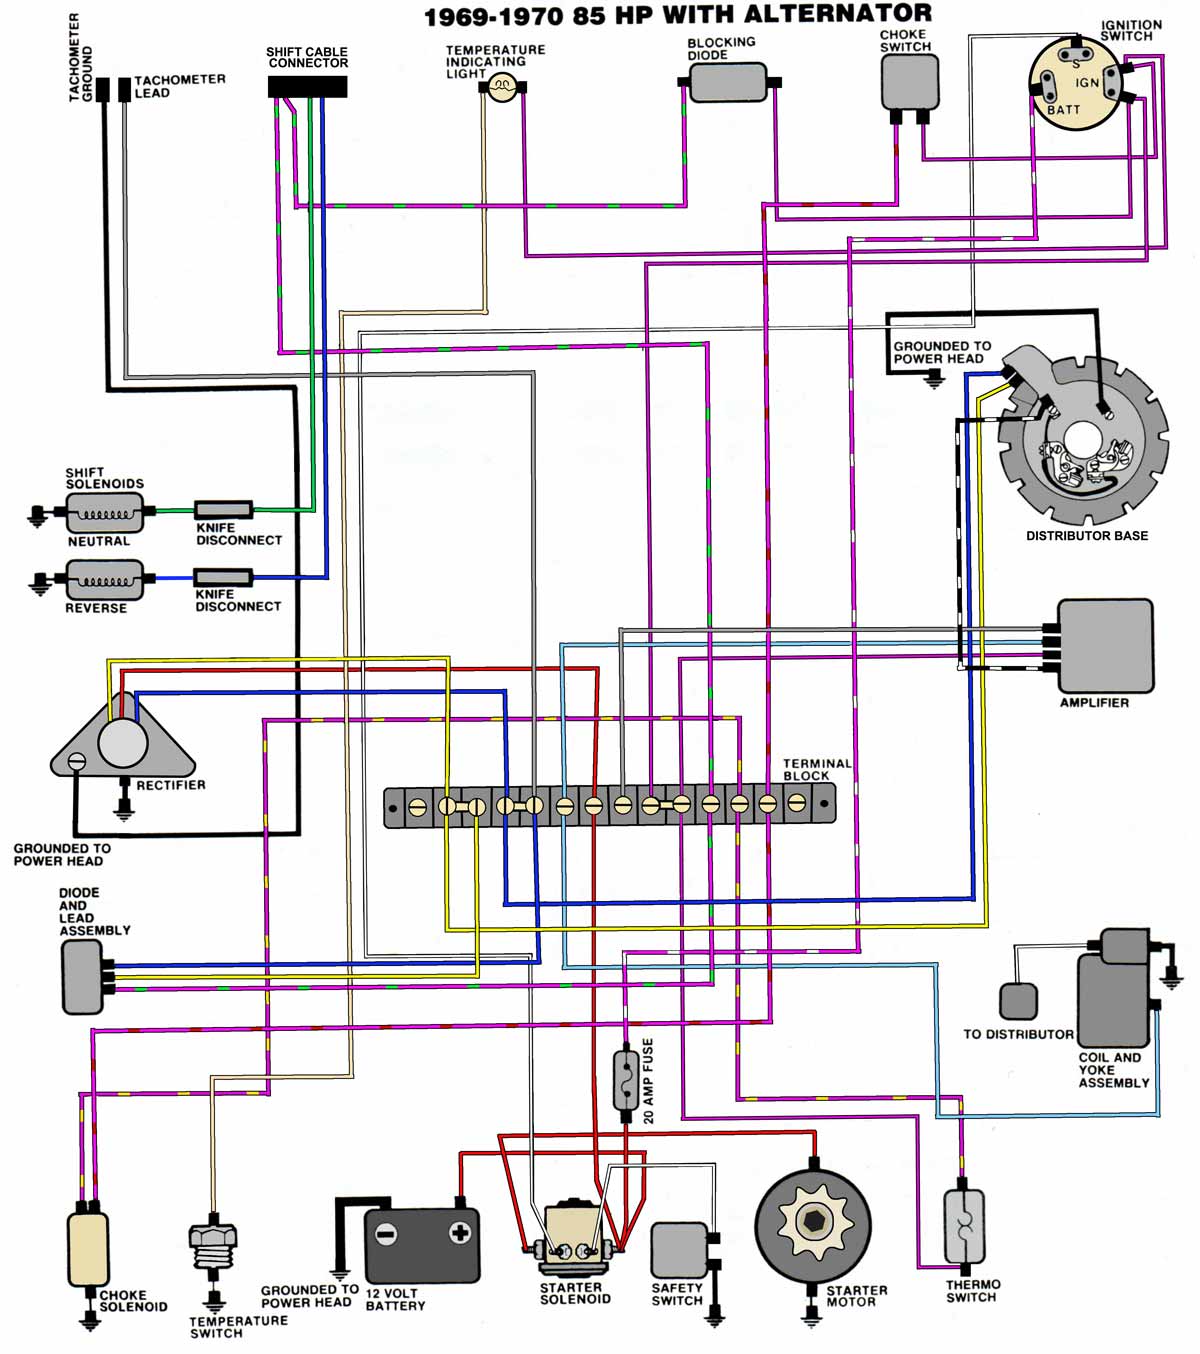 35hp chrysler outboard with alternator wiring diagram